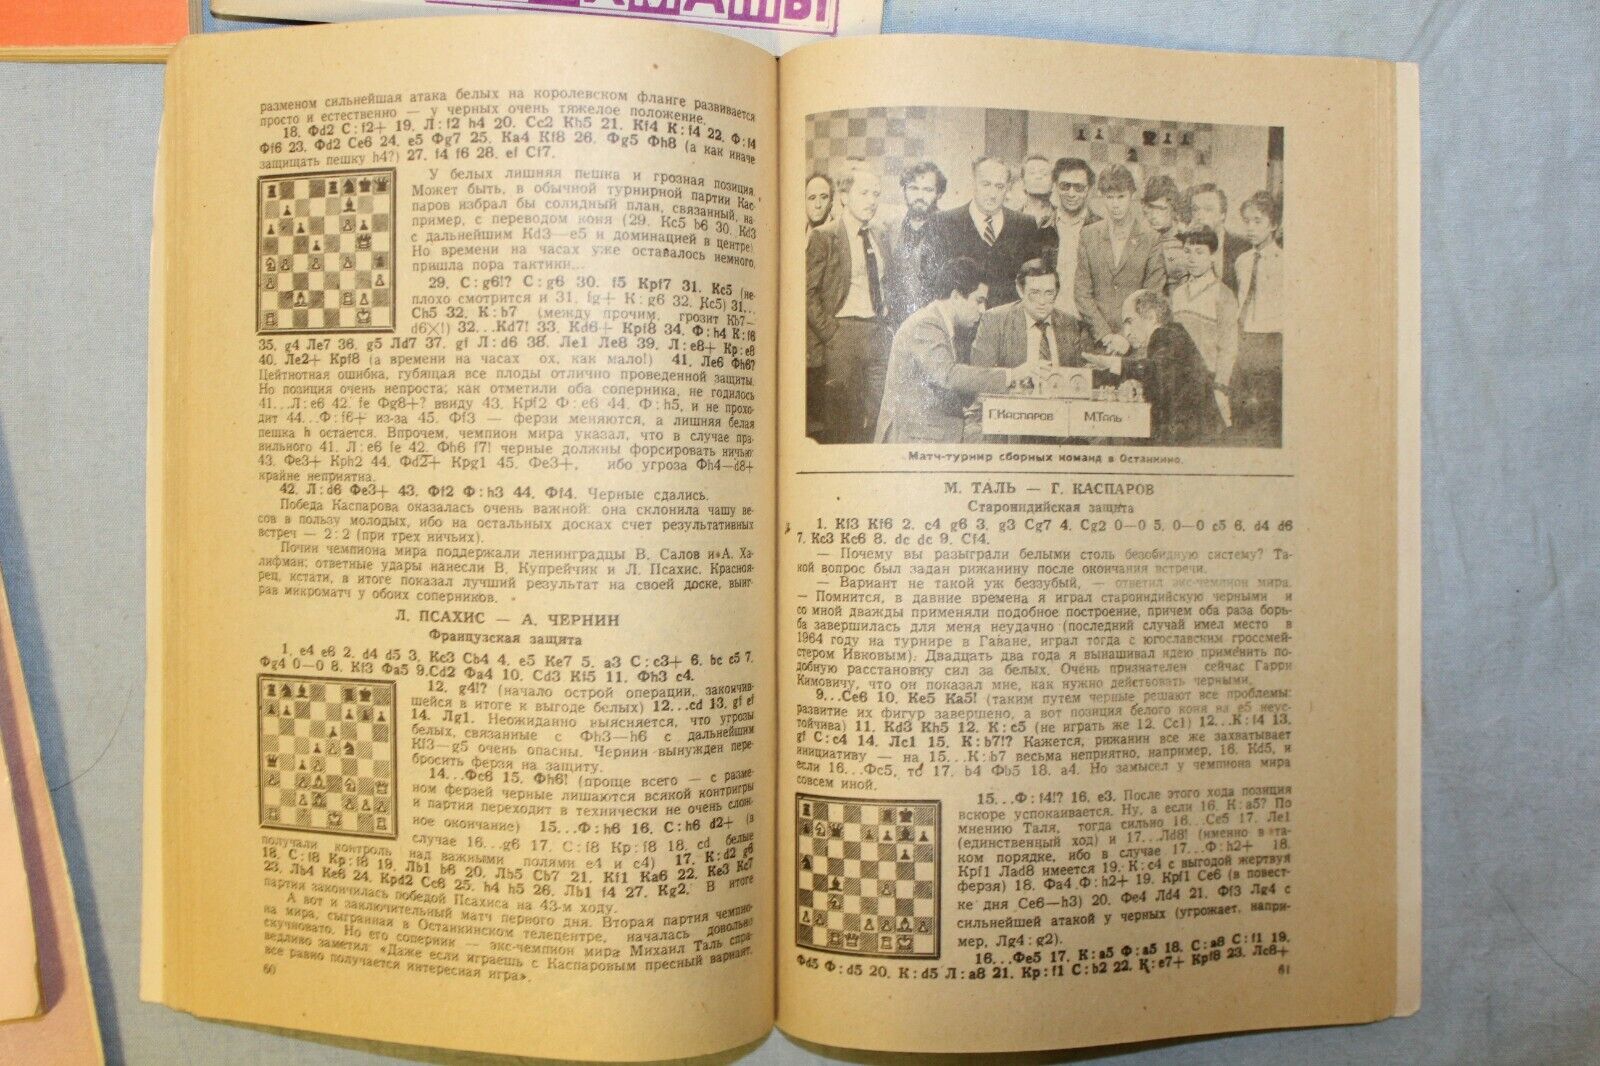 11242.Complet set all 8 issues of Chess Guid for Chess Fans 1980-1988